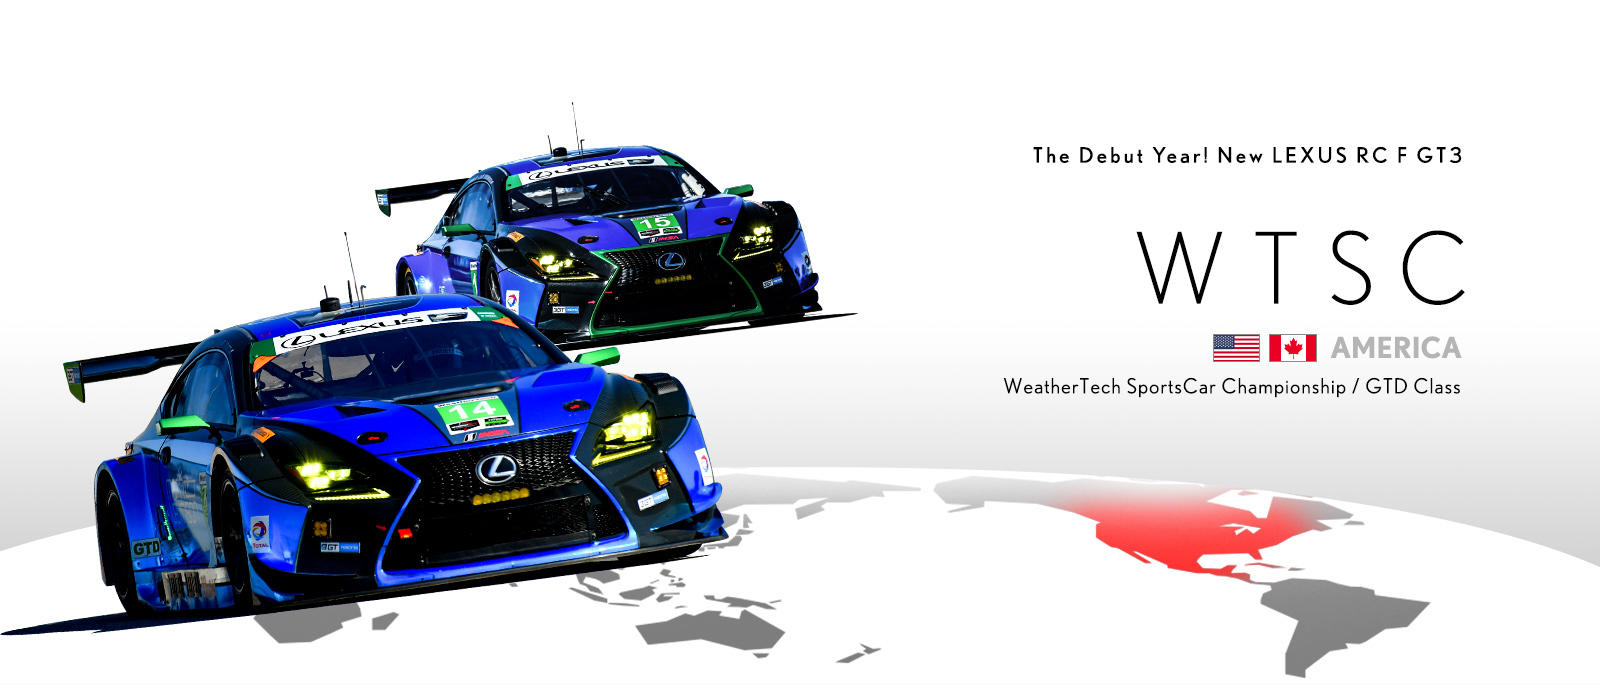 WTSC（GTD Class）〜アメリカの伝統シリーズで健闘 終盤戦はトップ10の常連となる〜 | The Debut Year! New LEXUS RC F GT3